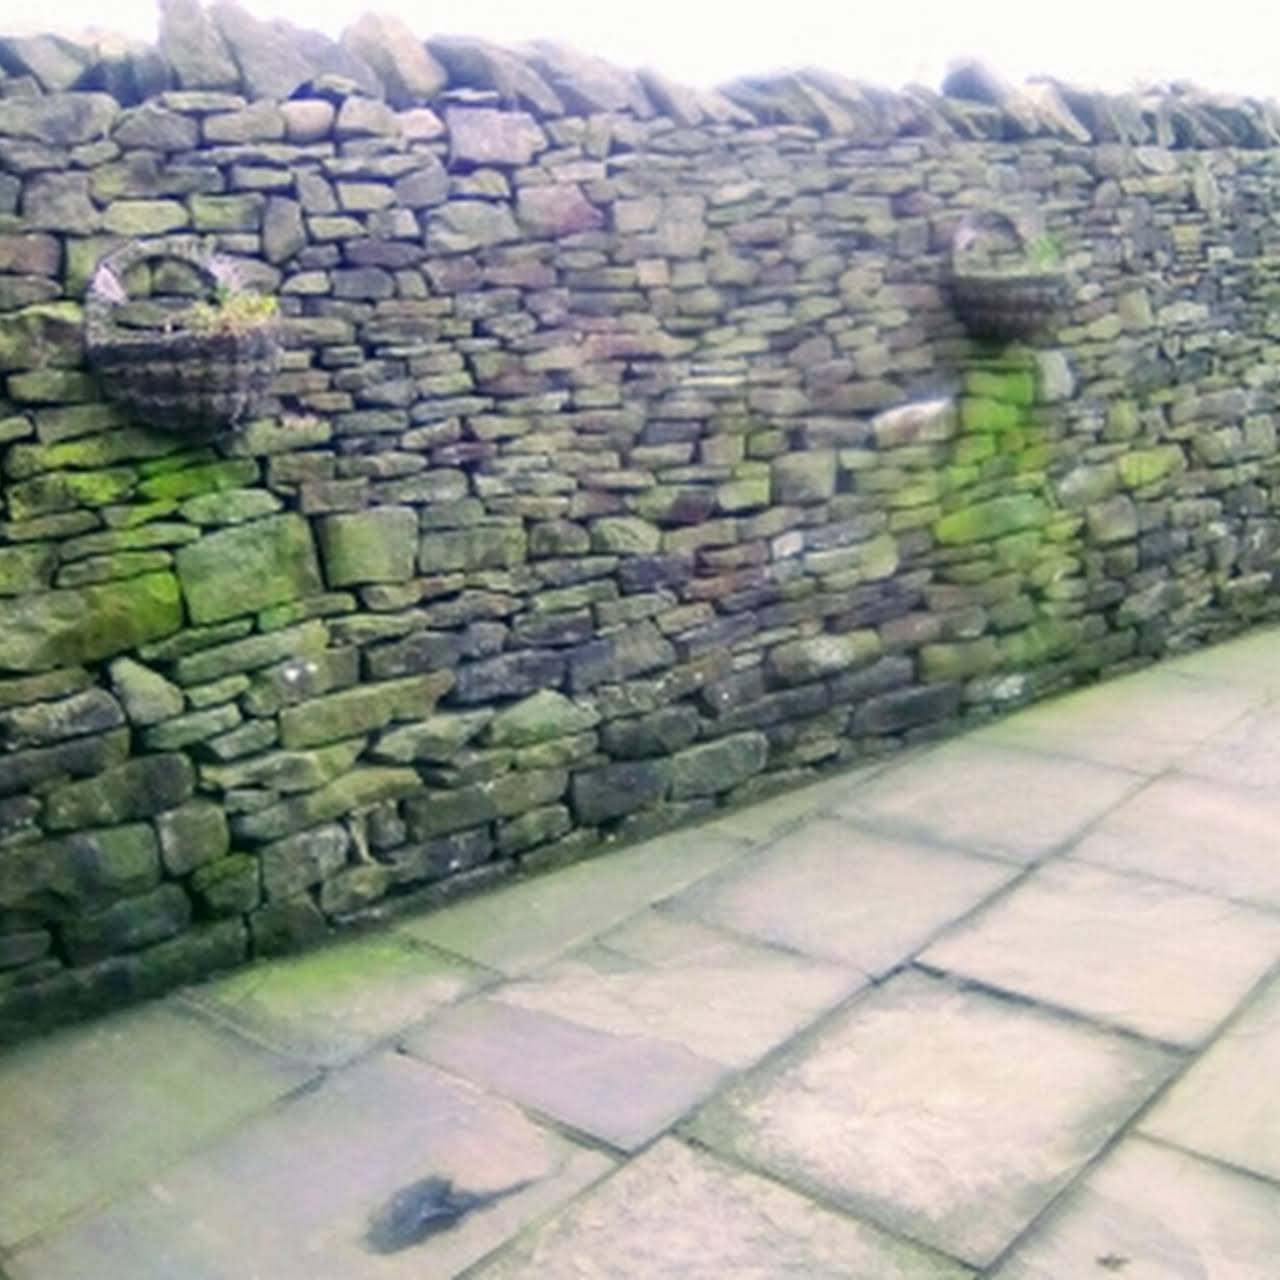 dry stone wall in Longridge, Ribble Valley from 6 years ago.